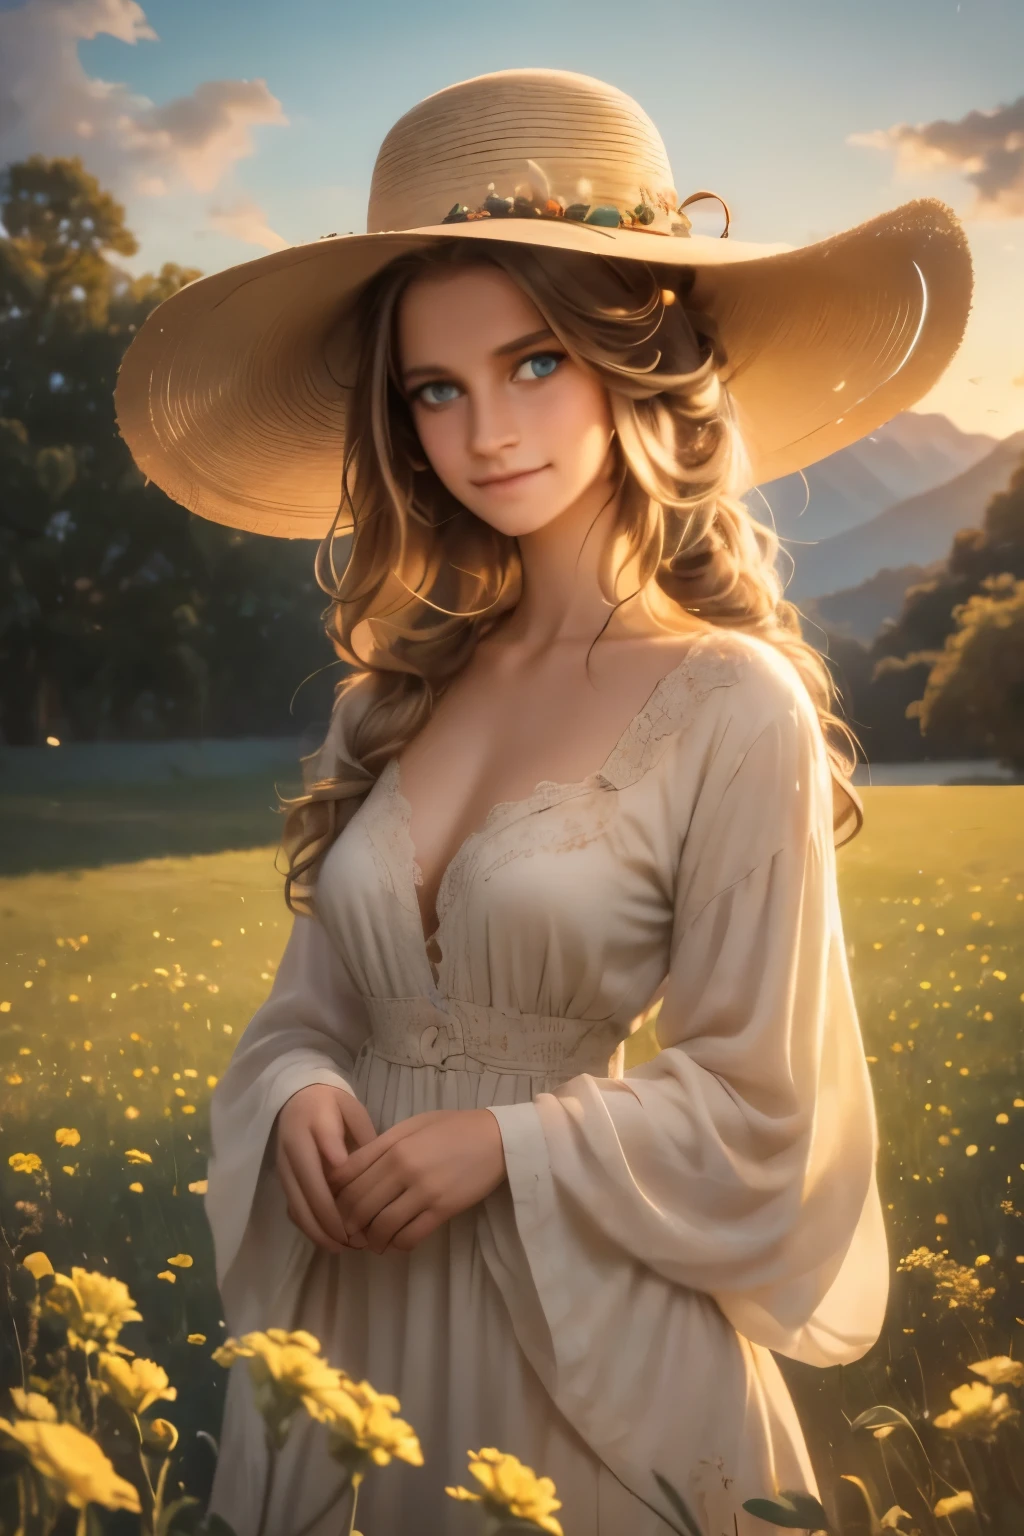 As the sun begins to set over a serene meadow, a serene meadow comes to life. In the center of the frame, a young buxom woman with freckles and very long curly blonde hair and a wide-brimmed hat gazes, tenderly into her surroundings. Her blue eyes bulge with a sense of contentment as she gazes towards the stars in the universe she occupies. The air is still, and the scent of fresh flowers fills the air, casting a soft golden glow on the landscape below. The words "innocent smile" are visible and hidden, a reminder of the boundless possibilities that can be found in the realm of imagination.